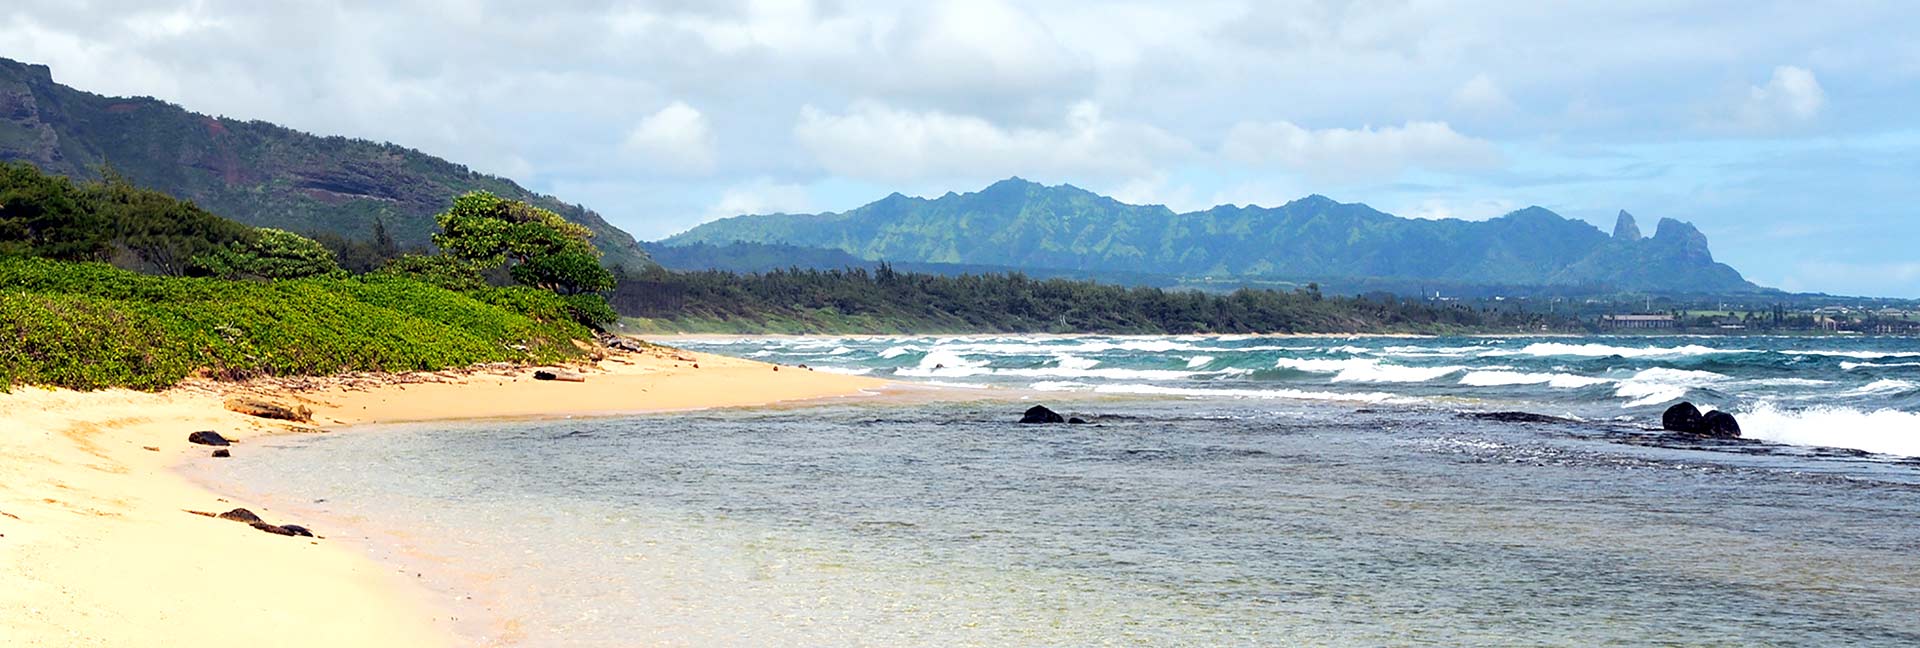 Beach shoreline off Kauai with green foliage on the shore and green mountains in the background